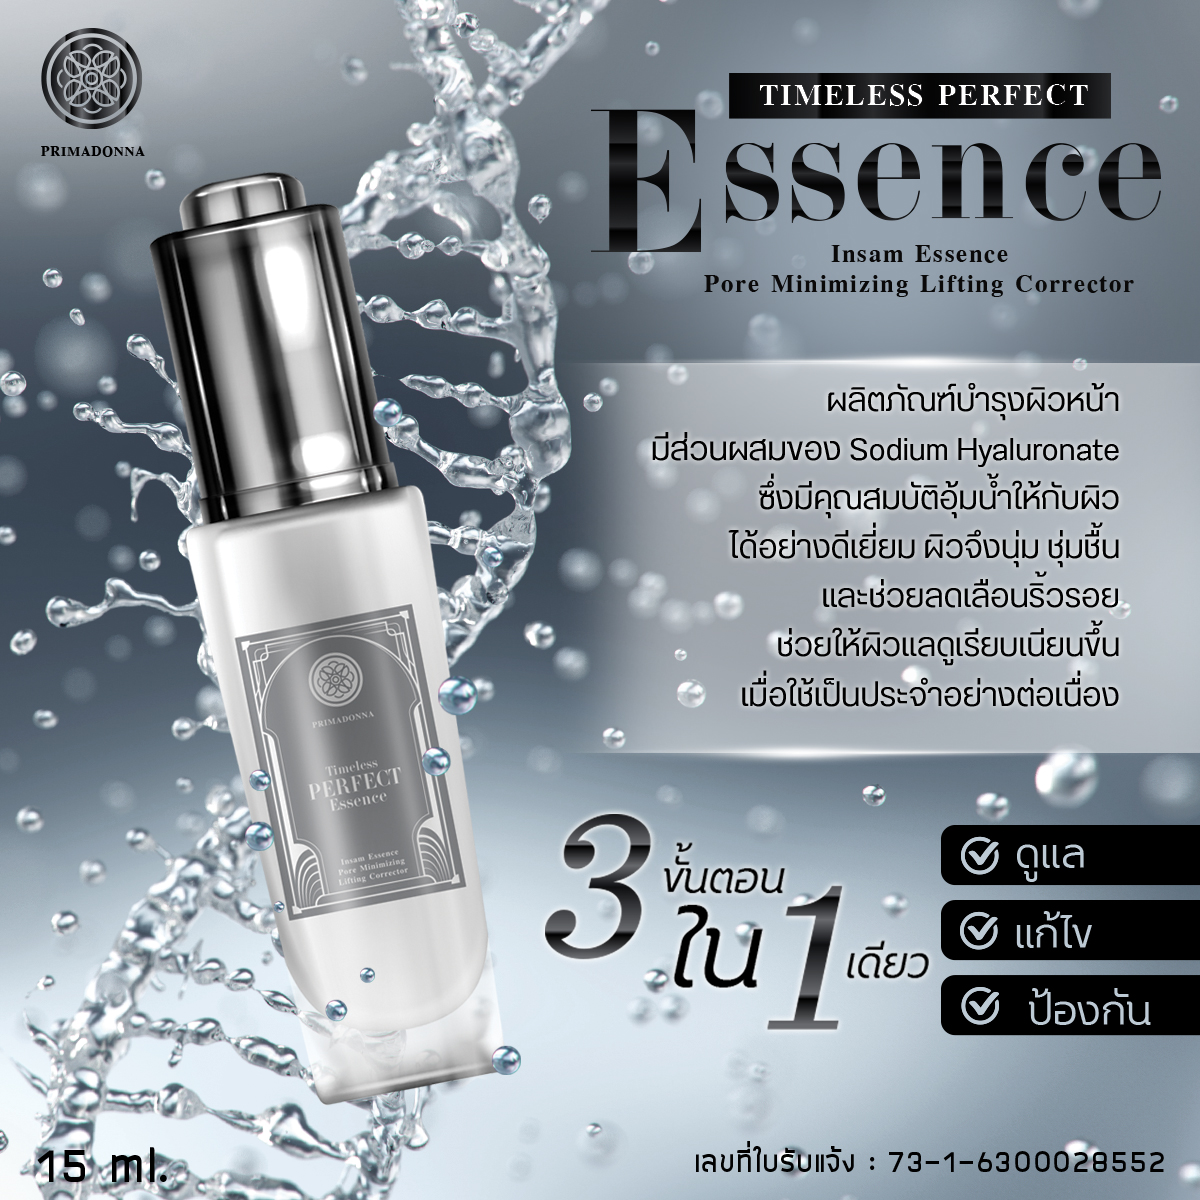 Timeless Perfect Essence